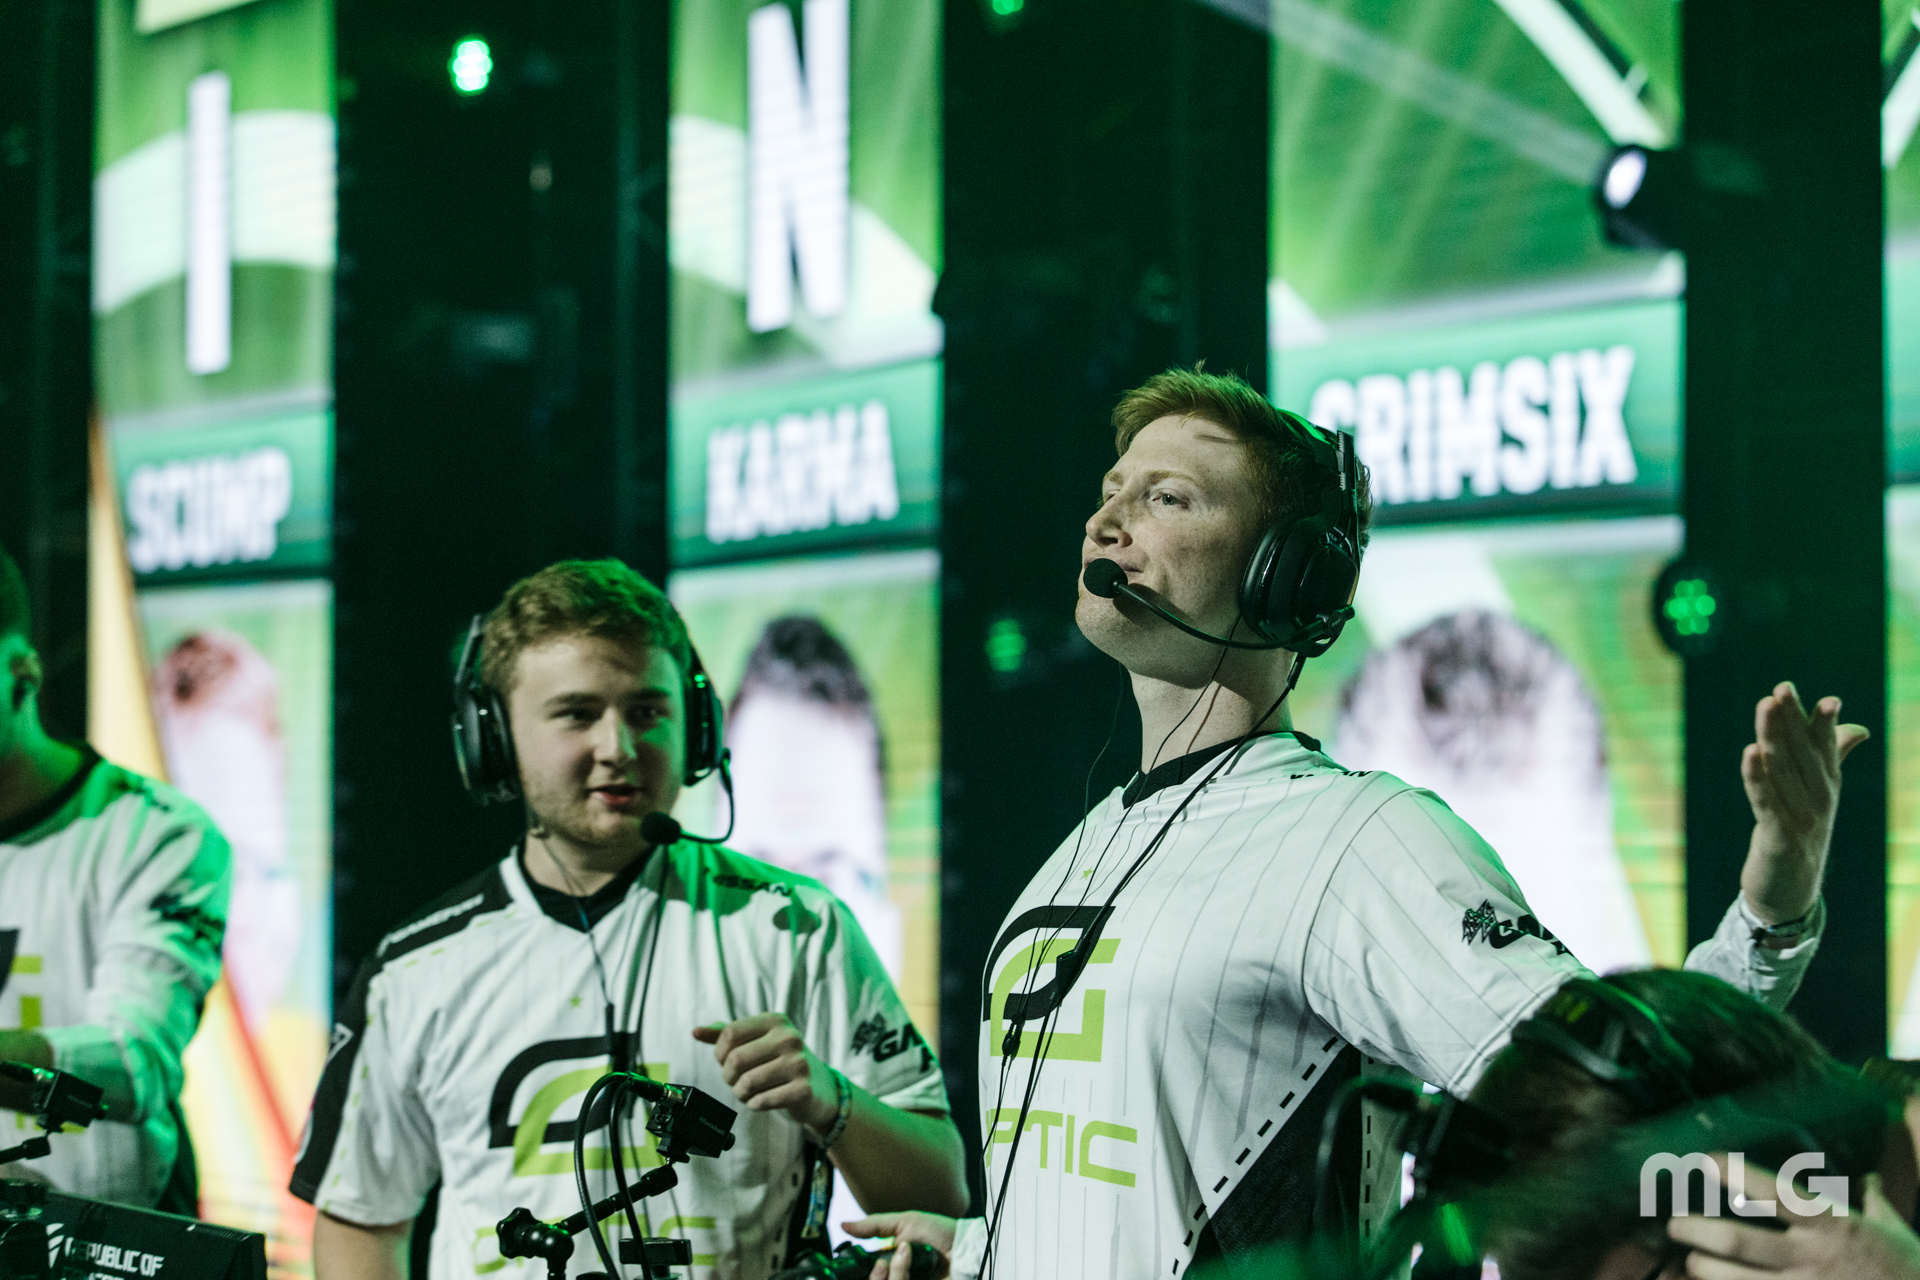 Chicago’s Call of Duty franchise introduces lineup featuring Scump and Form...